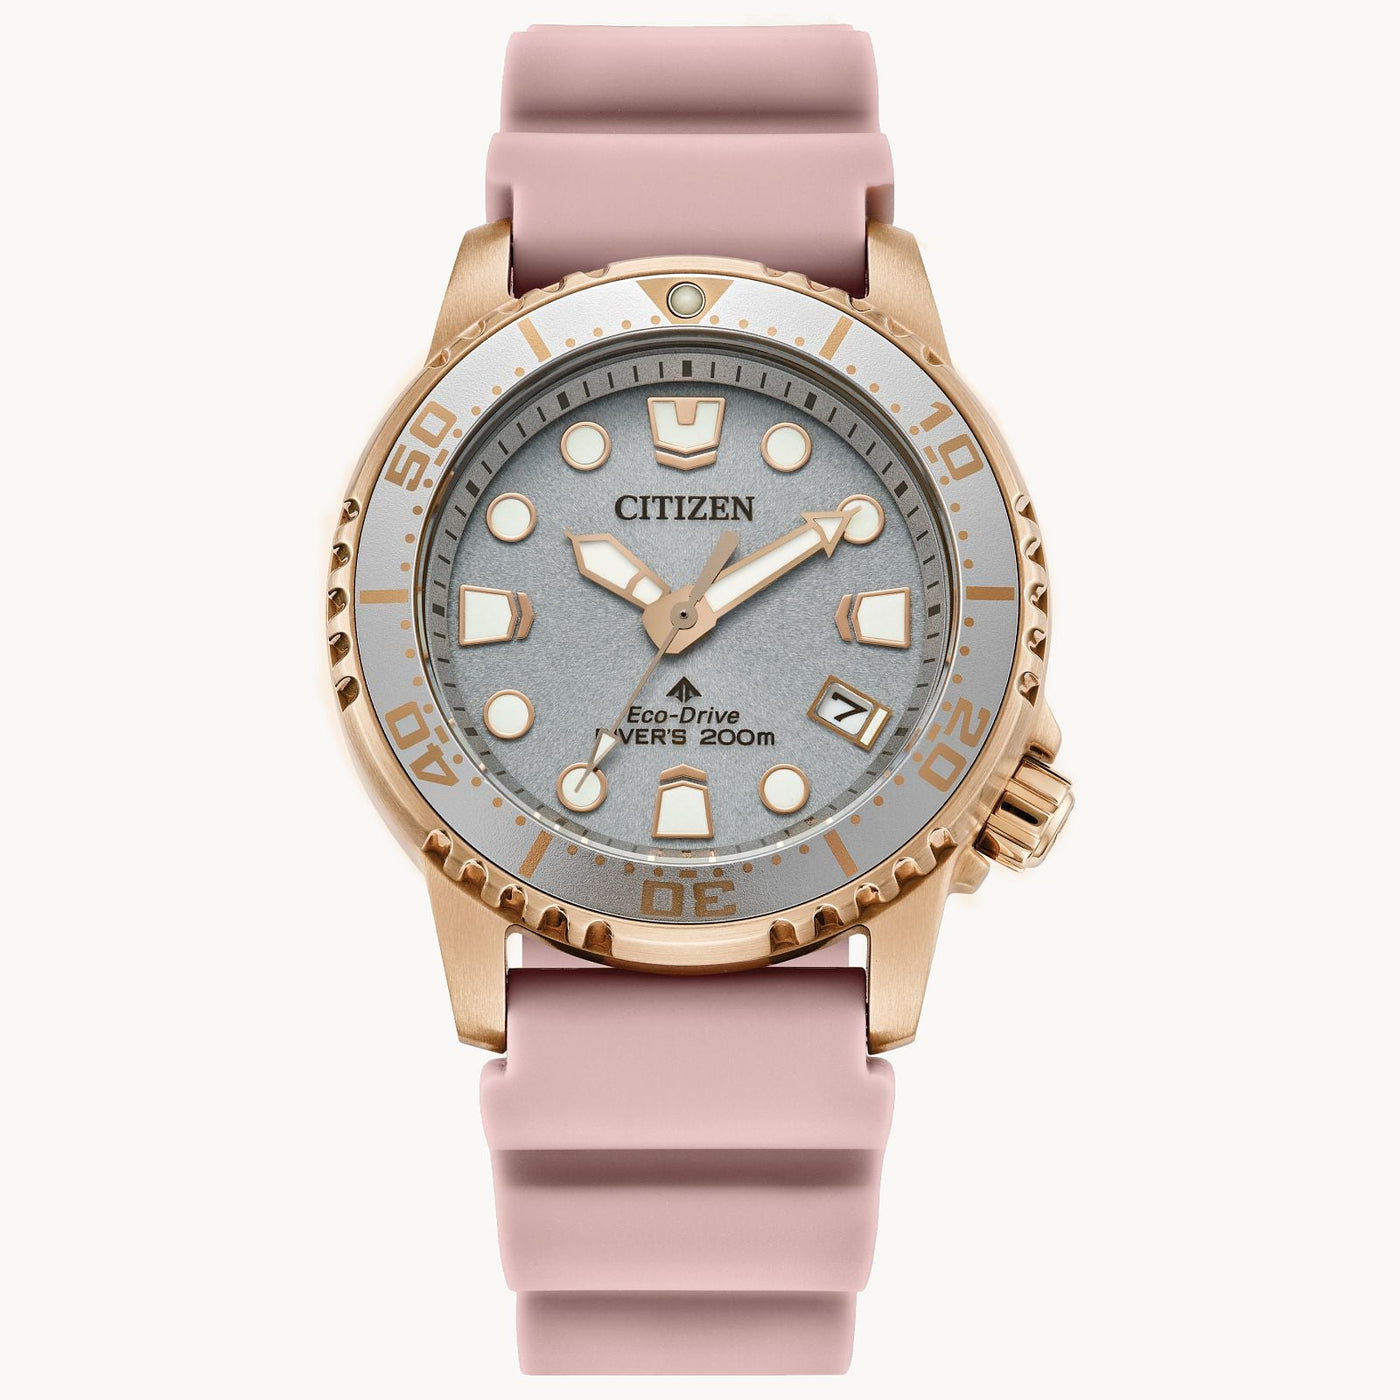 Citizen Eco-Drive Promaster Dive 200m Watch with a Pink Band